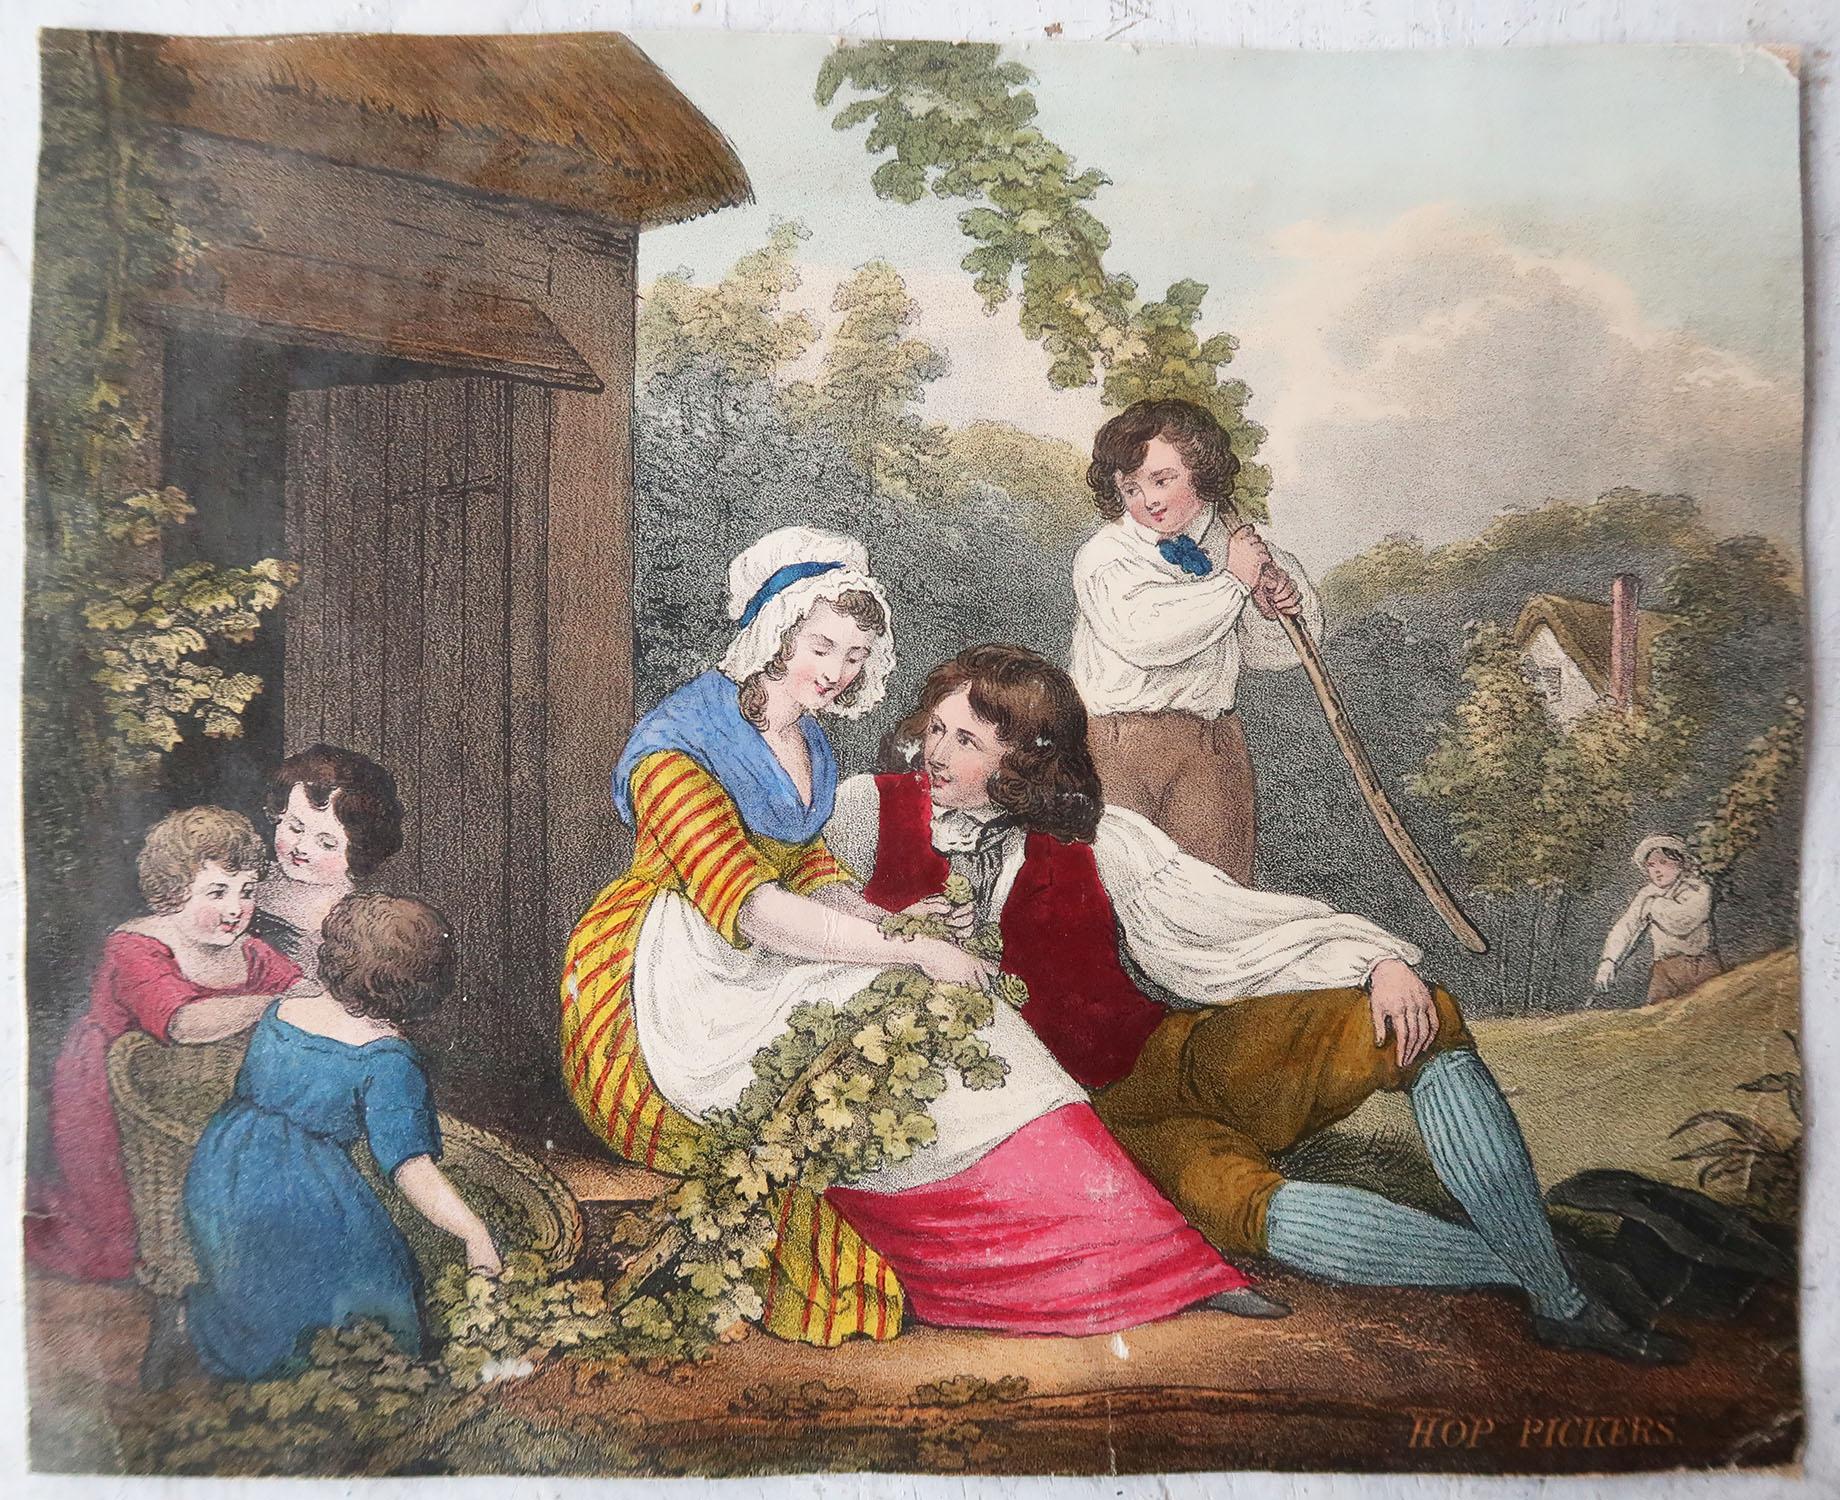 A super set of prints of children in rustic scenes.

Chromolithographs on paper, Published circa 1850

Paper is attached to canvas

Unframed

The measurement given below is for one of the prints

Free shipping.






 